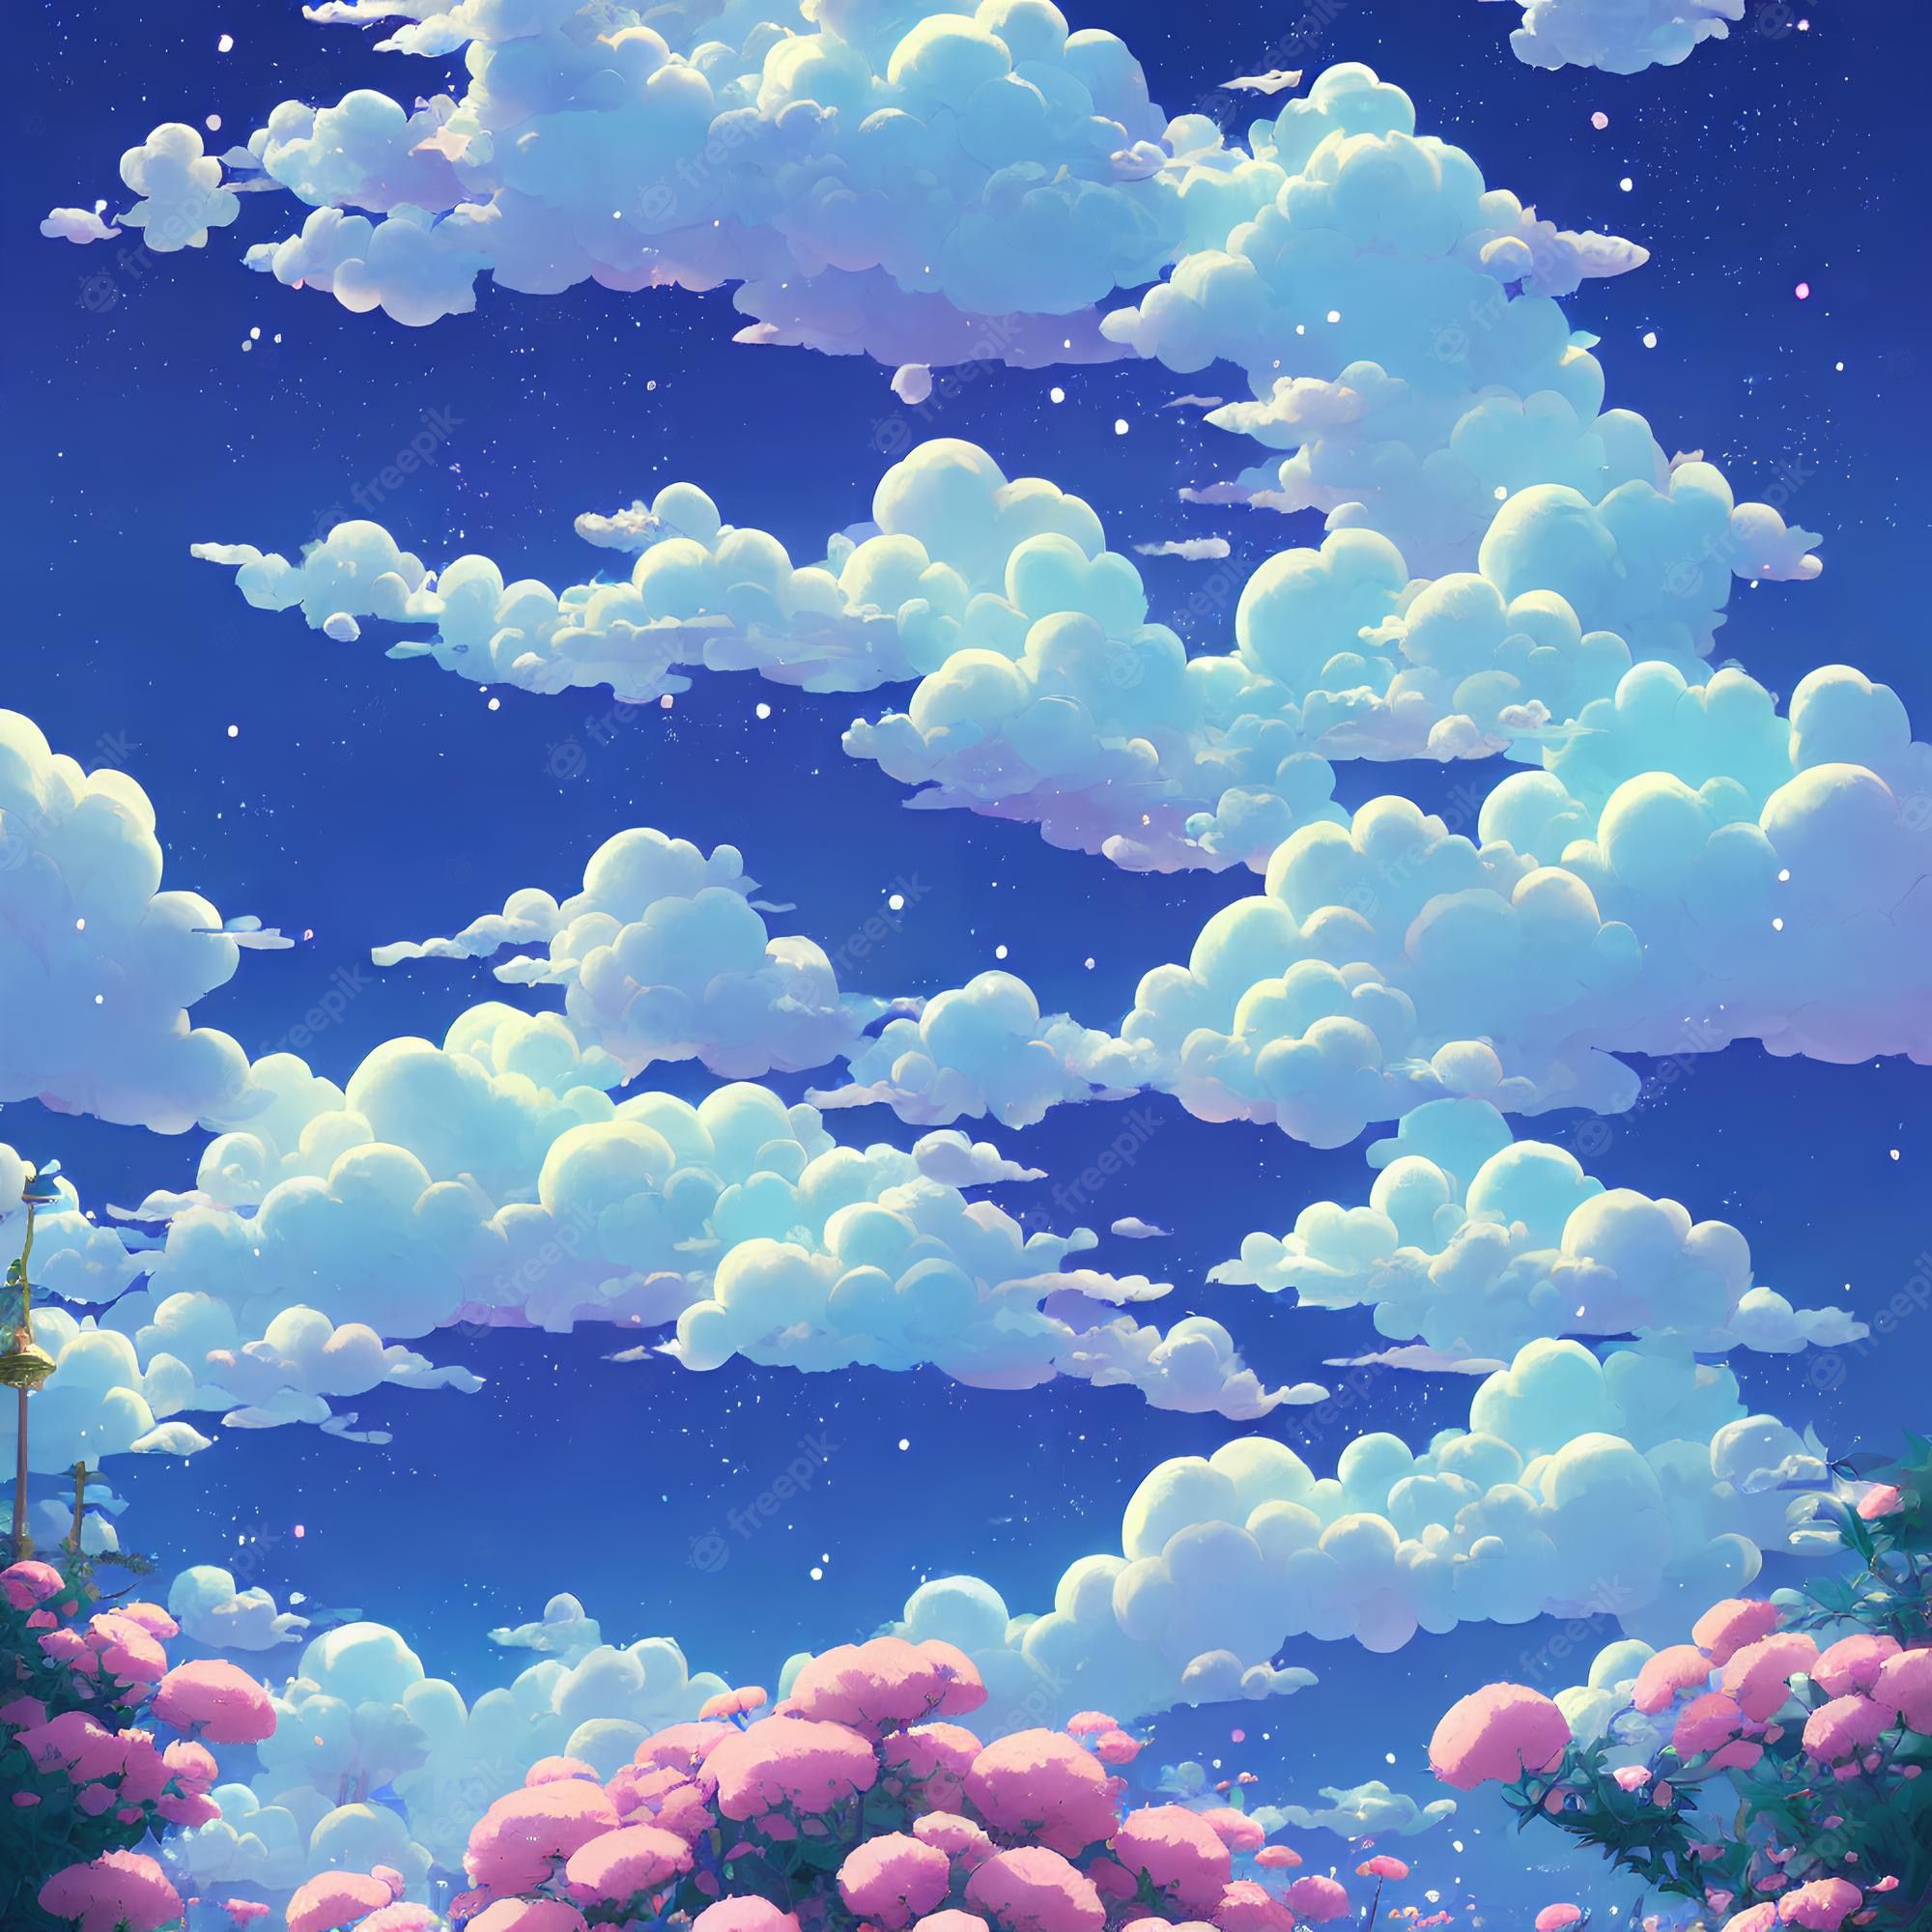 A painting of a blue sky with white clouds and pink flowers - Anime landscape